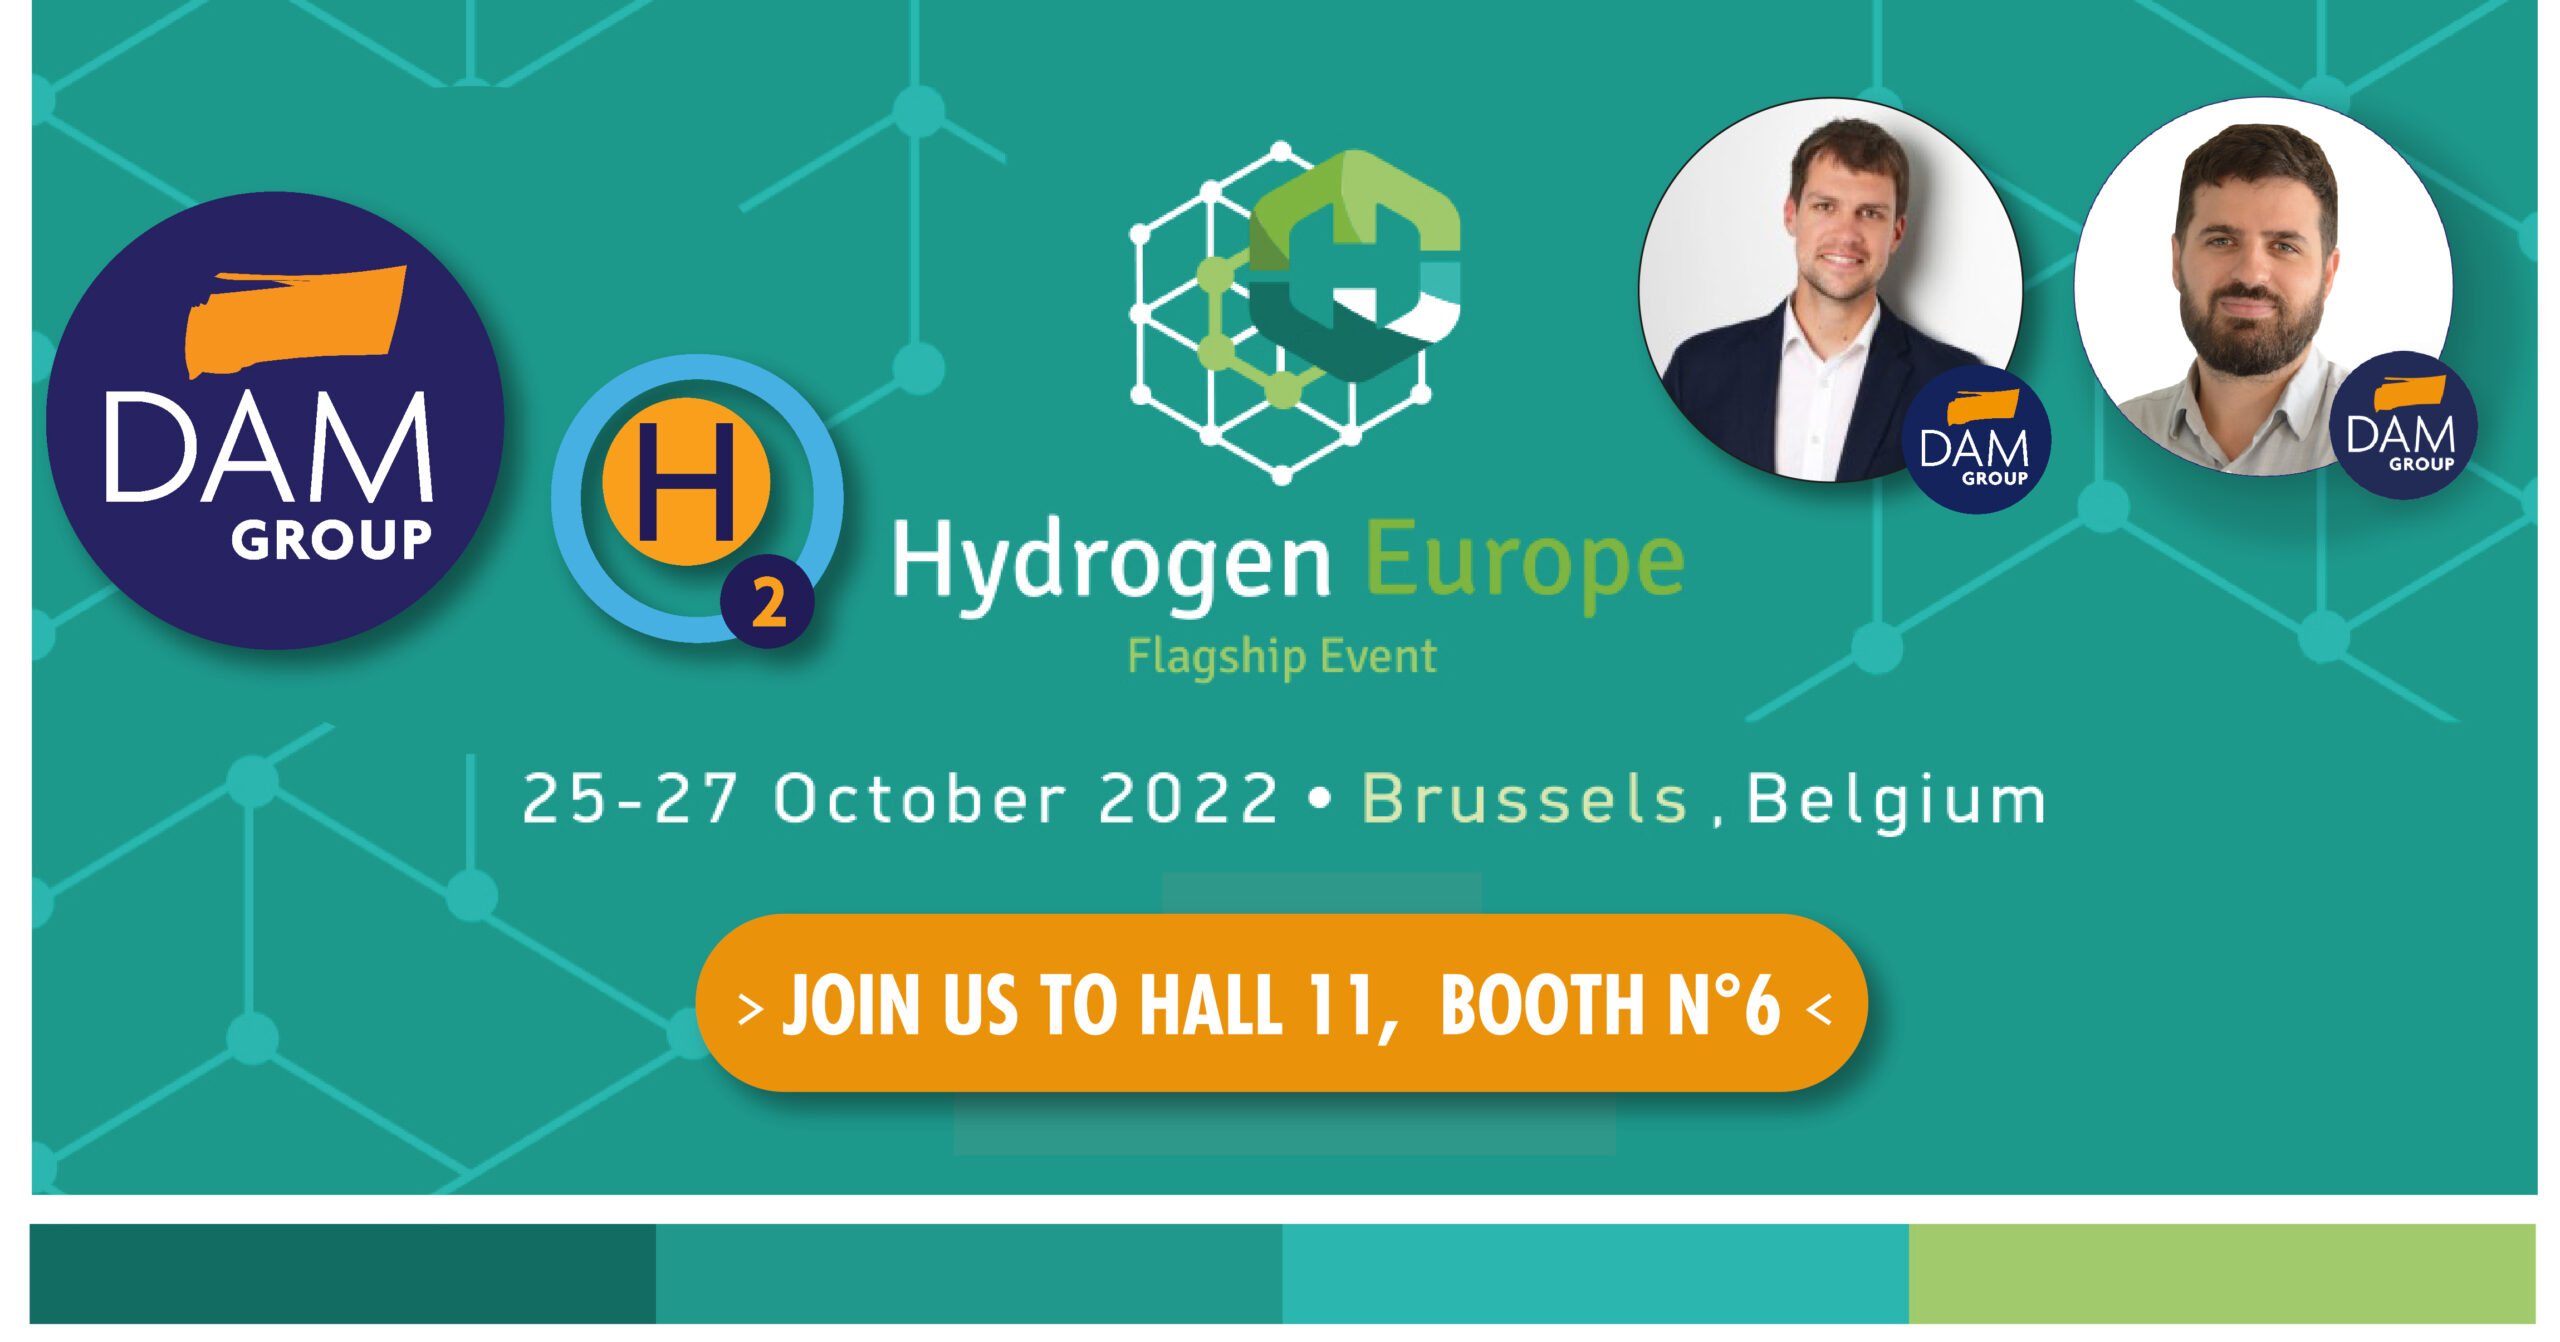 DAM GROUP TEAMS FOR HYDROGEN EUROPE FLAGSHIP EVENT